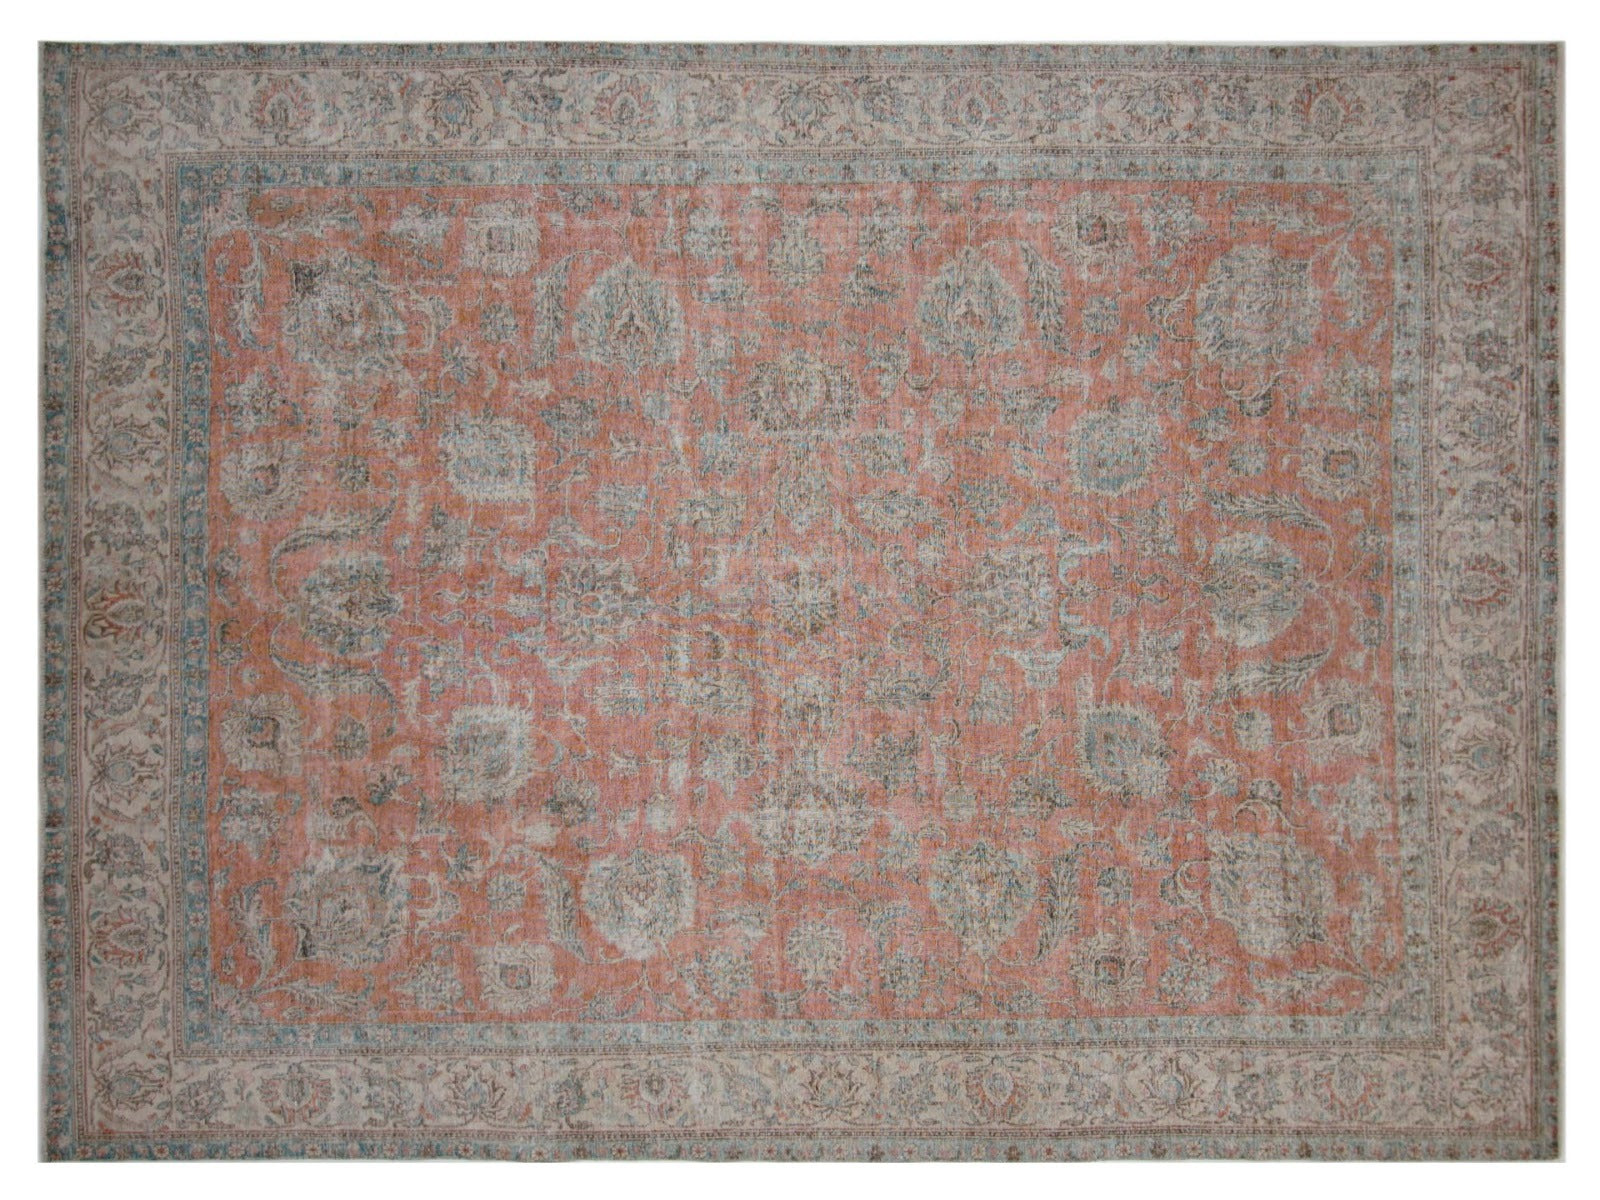 9x12 vintage Persian rug featuring faded red colors and a beige border, hand-knotted in 100% wool